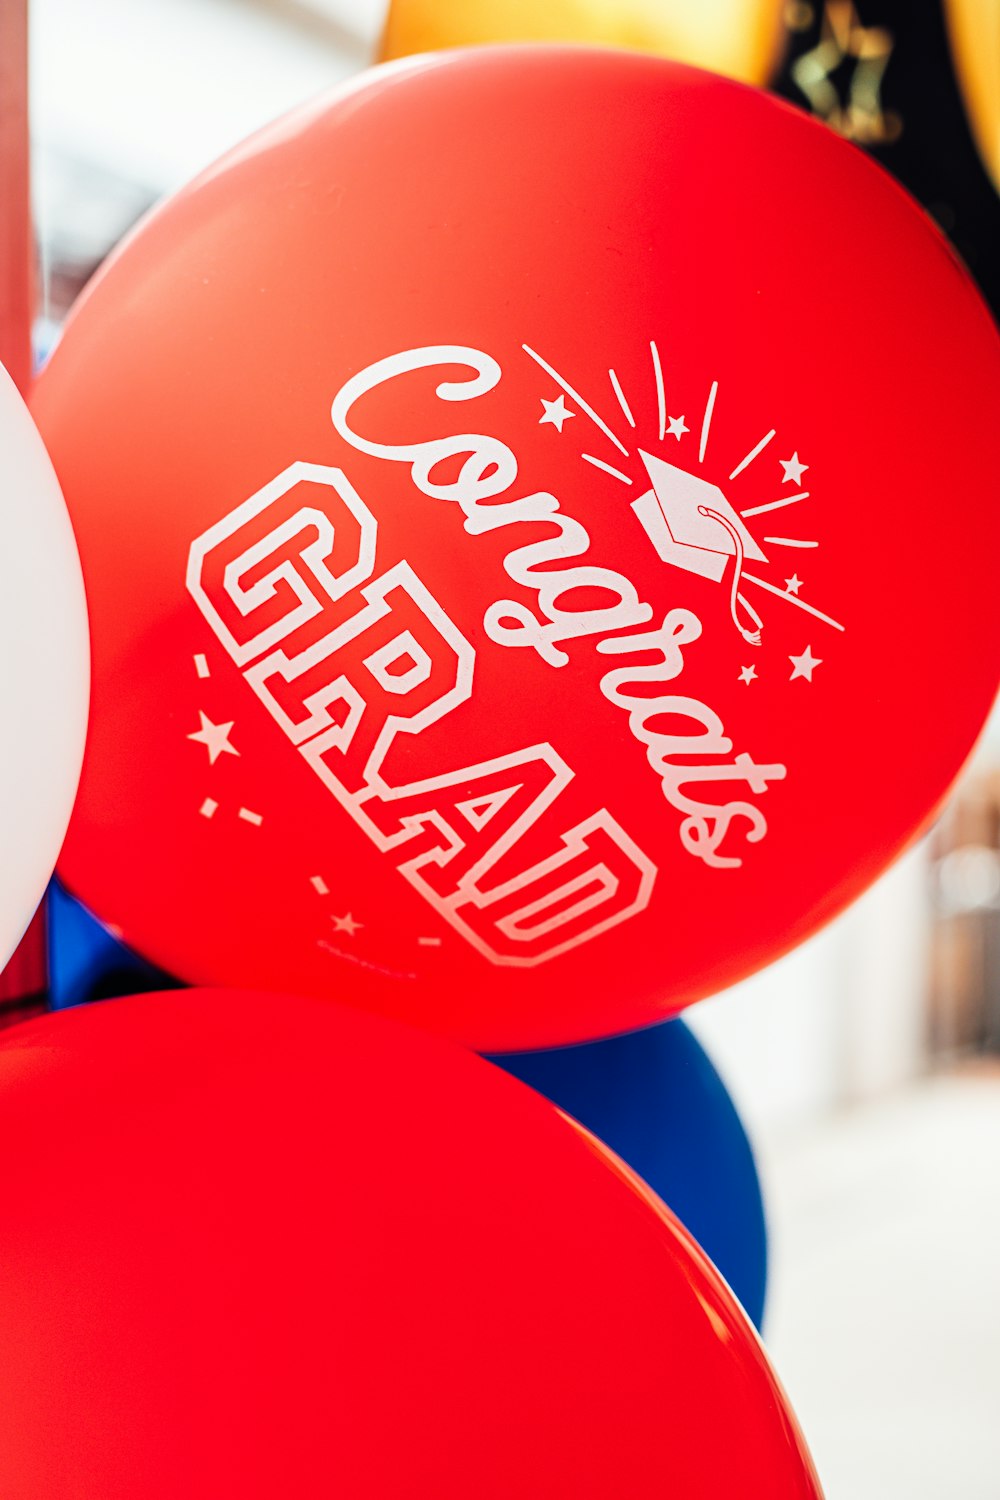 a bunch of red and blue balloons with white lettering